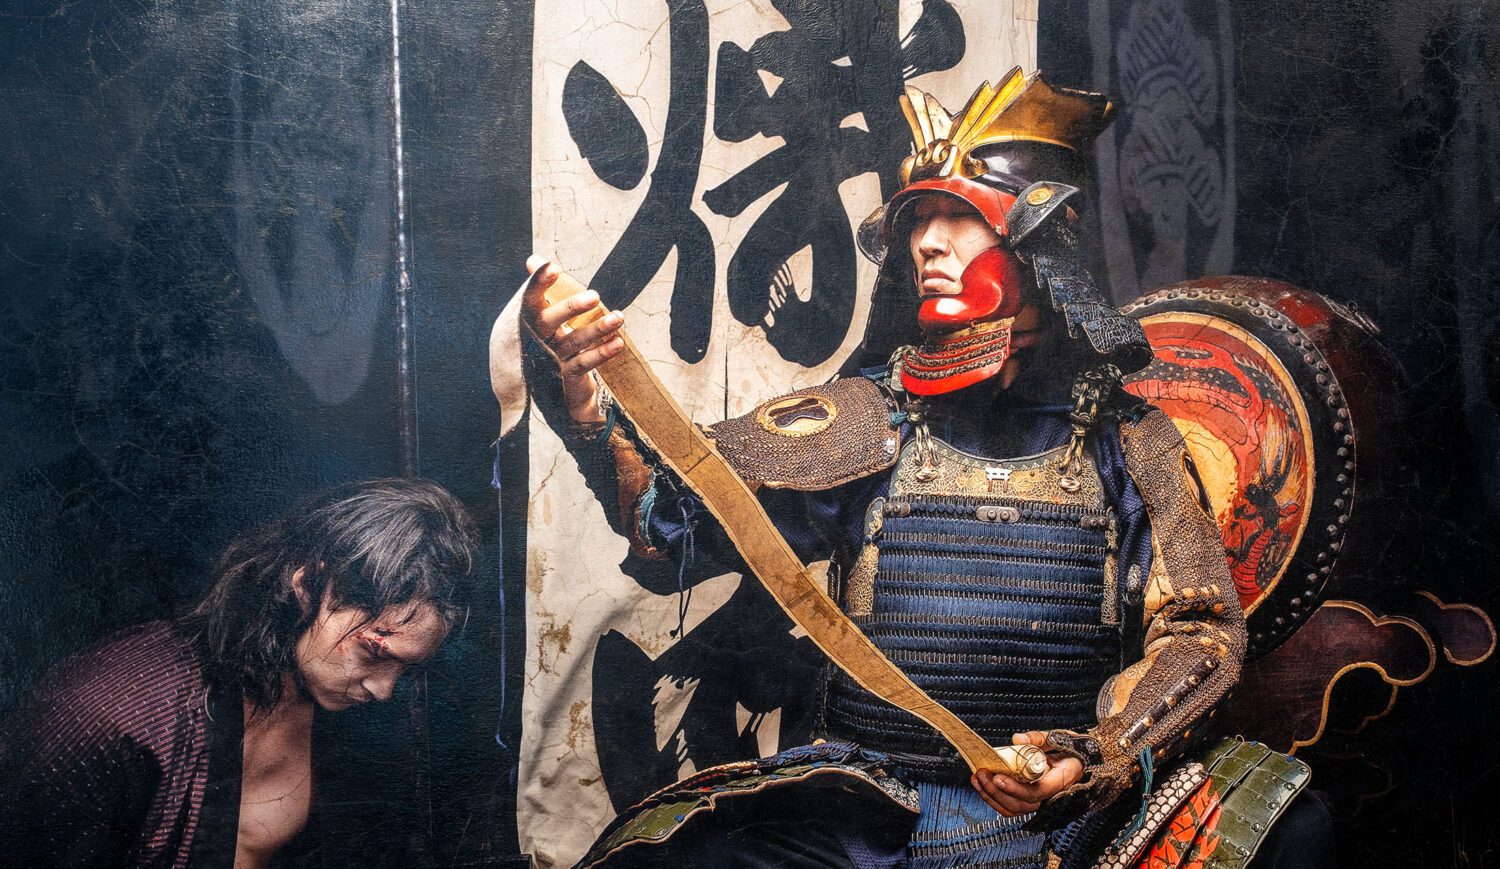 The Samurai Museum Berlin is the first museum in Europe dedicated to the art and history of Japanese warriors